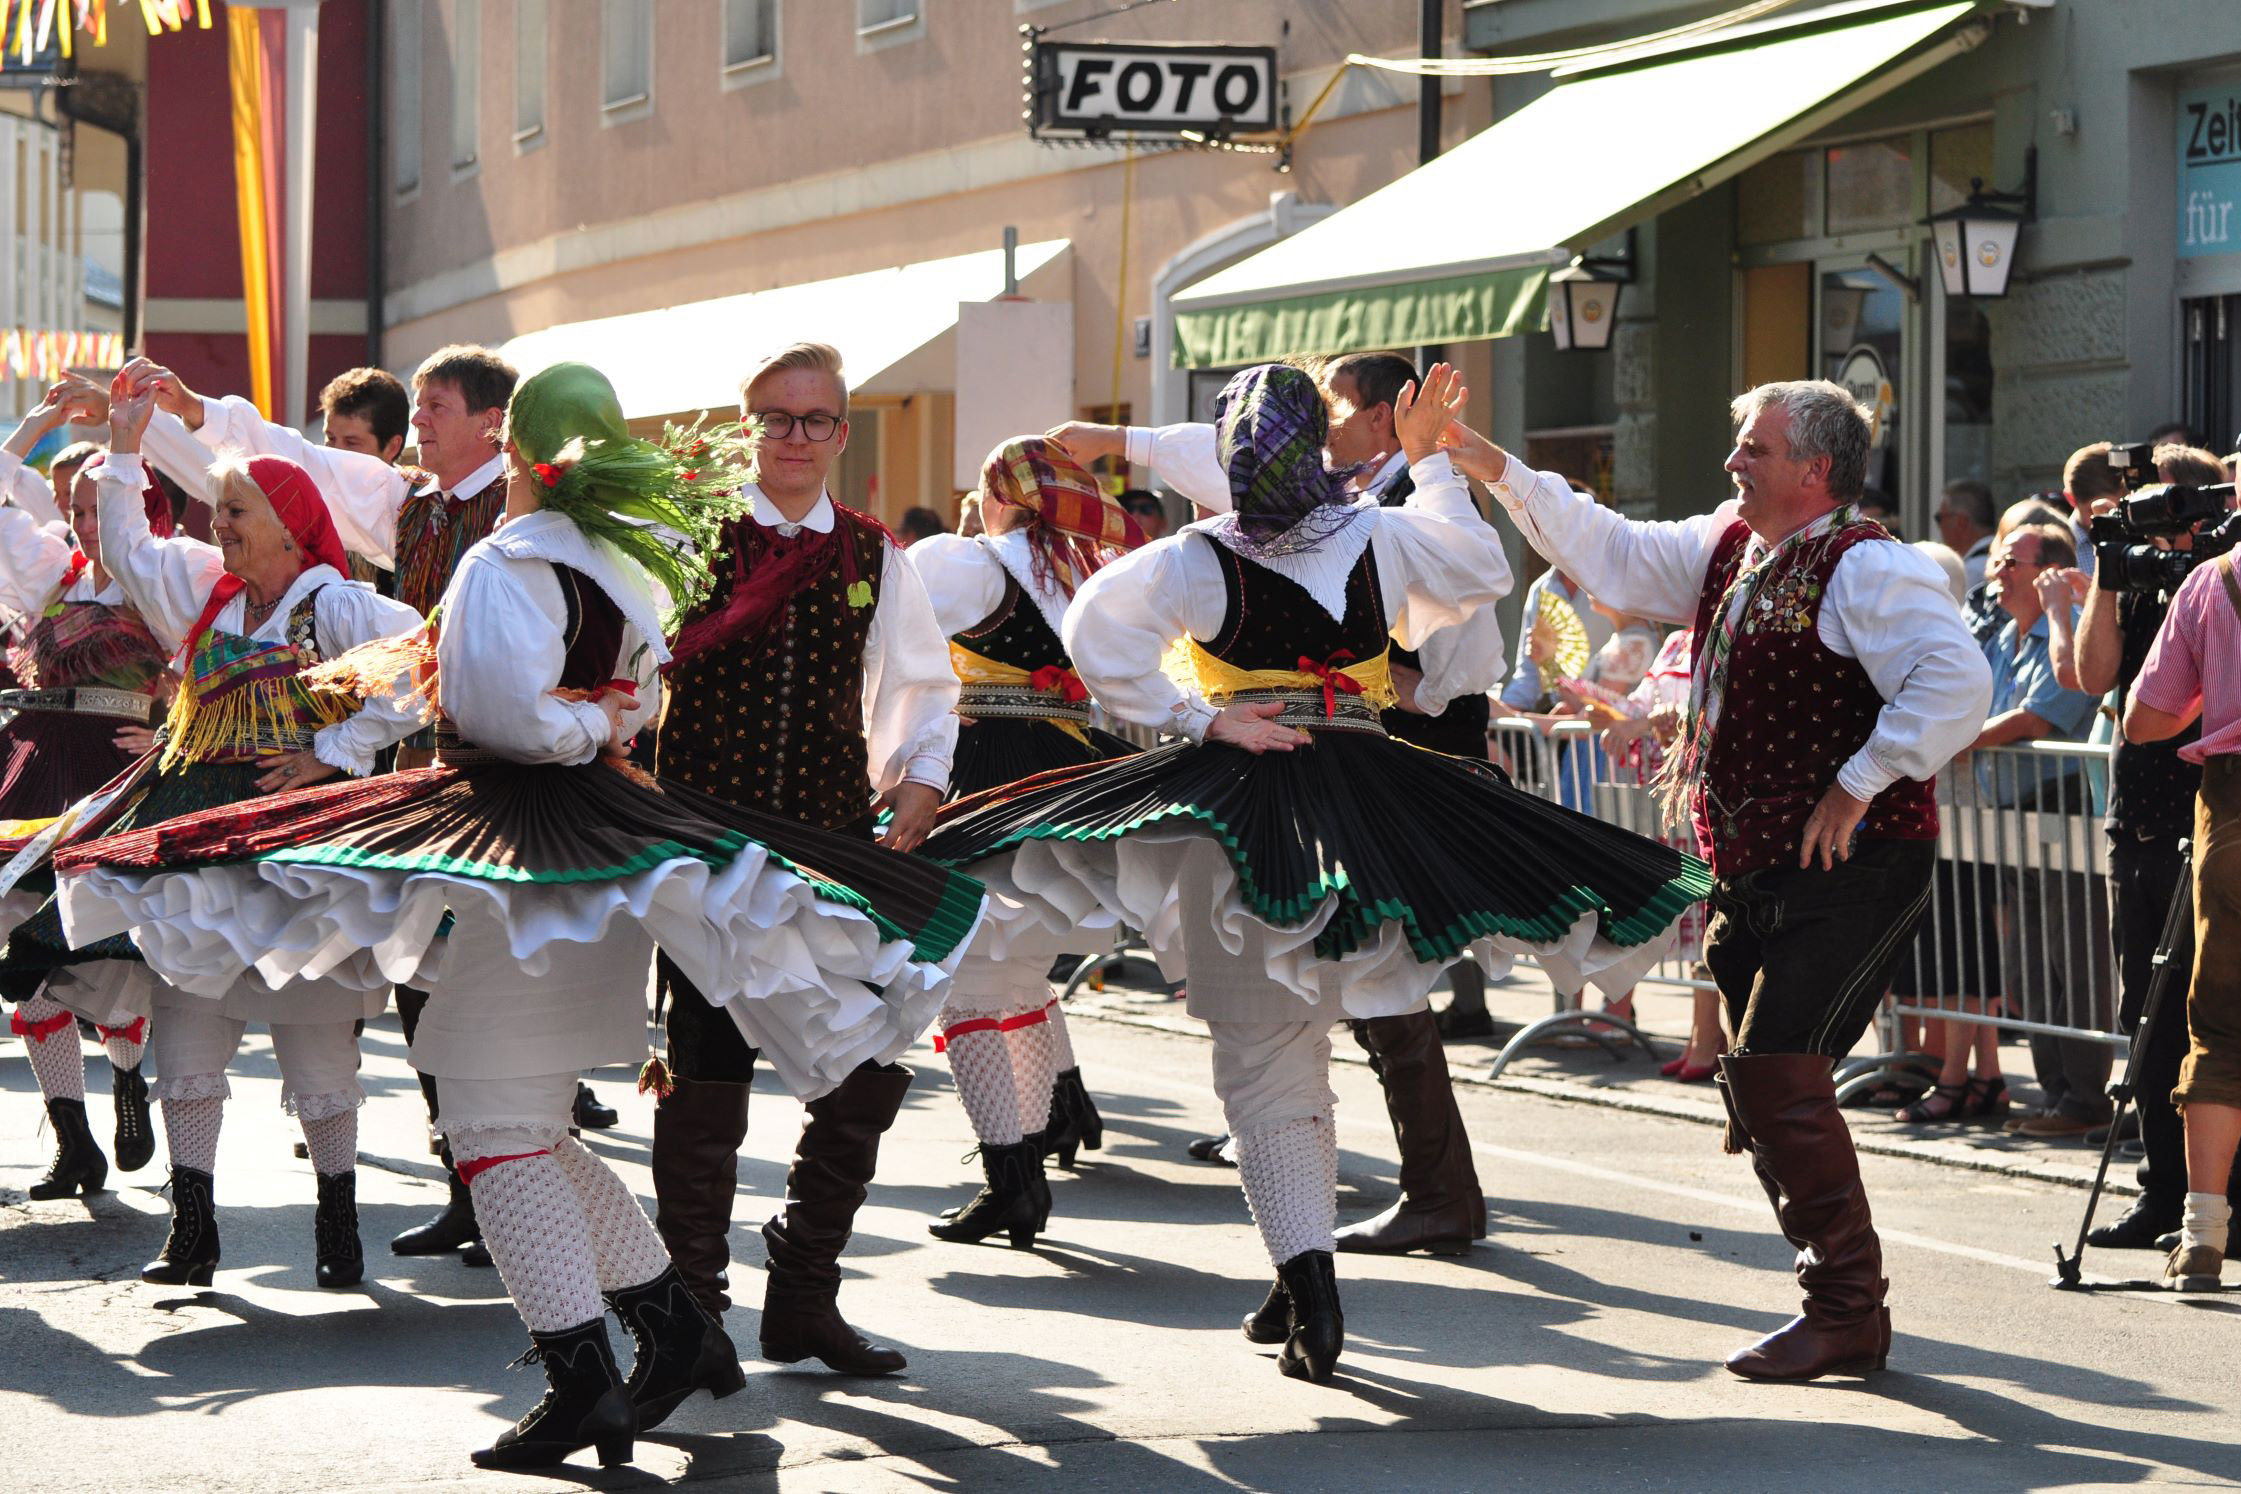 A crowd dancing in traditional clothes of Villacher Kirchtag